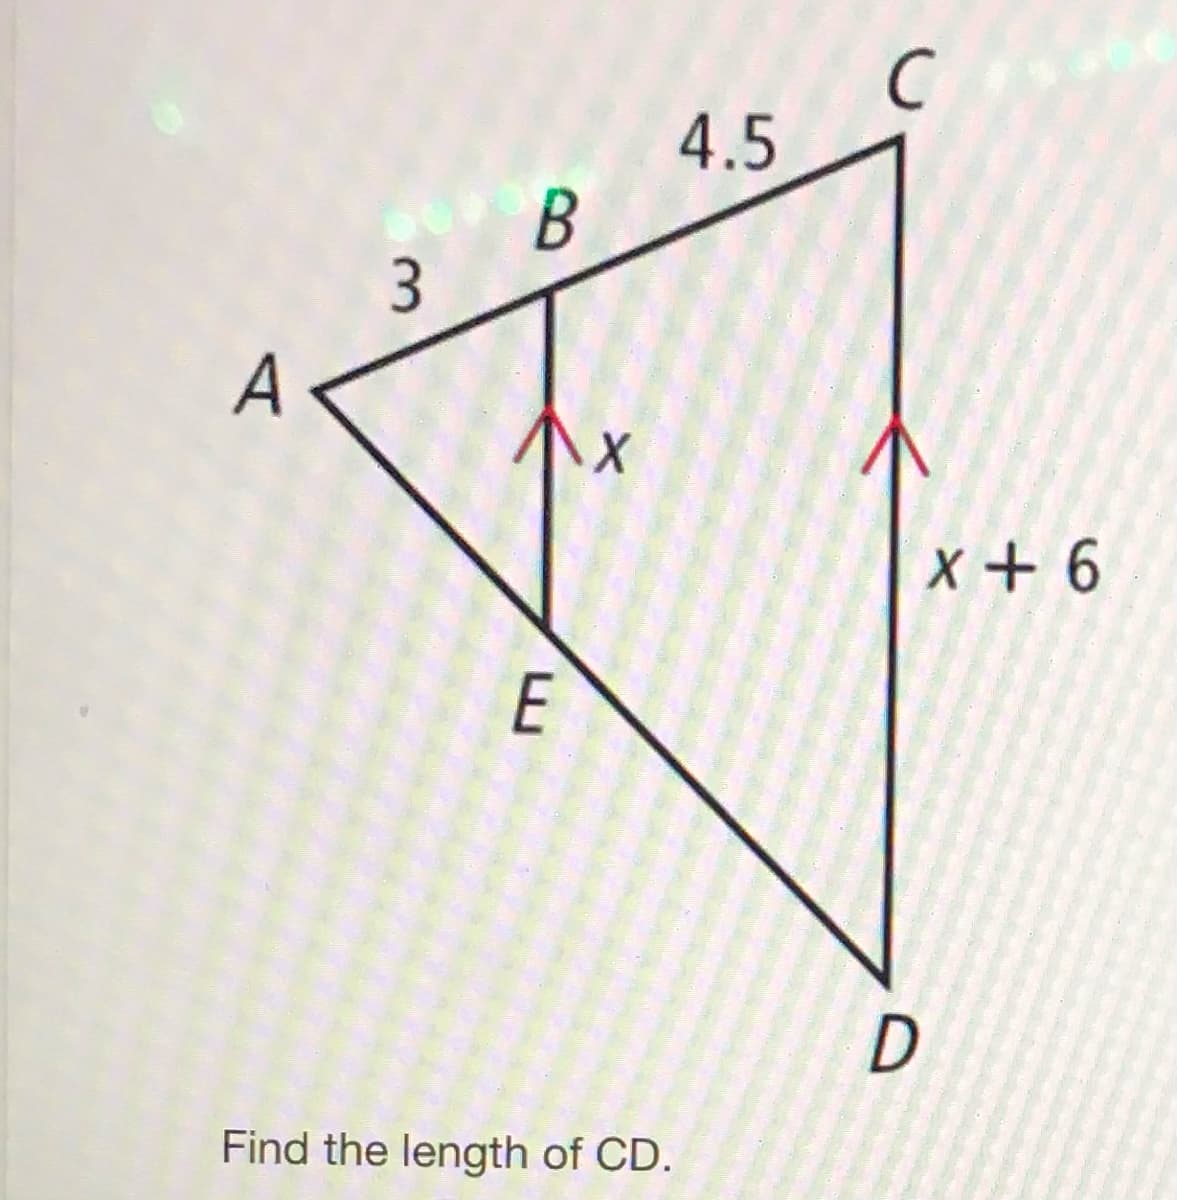 4.5
A
X + 6
Find the length of CD.
3.
